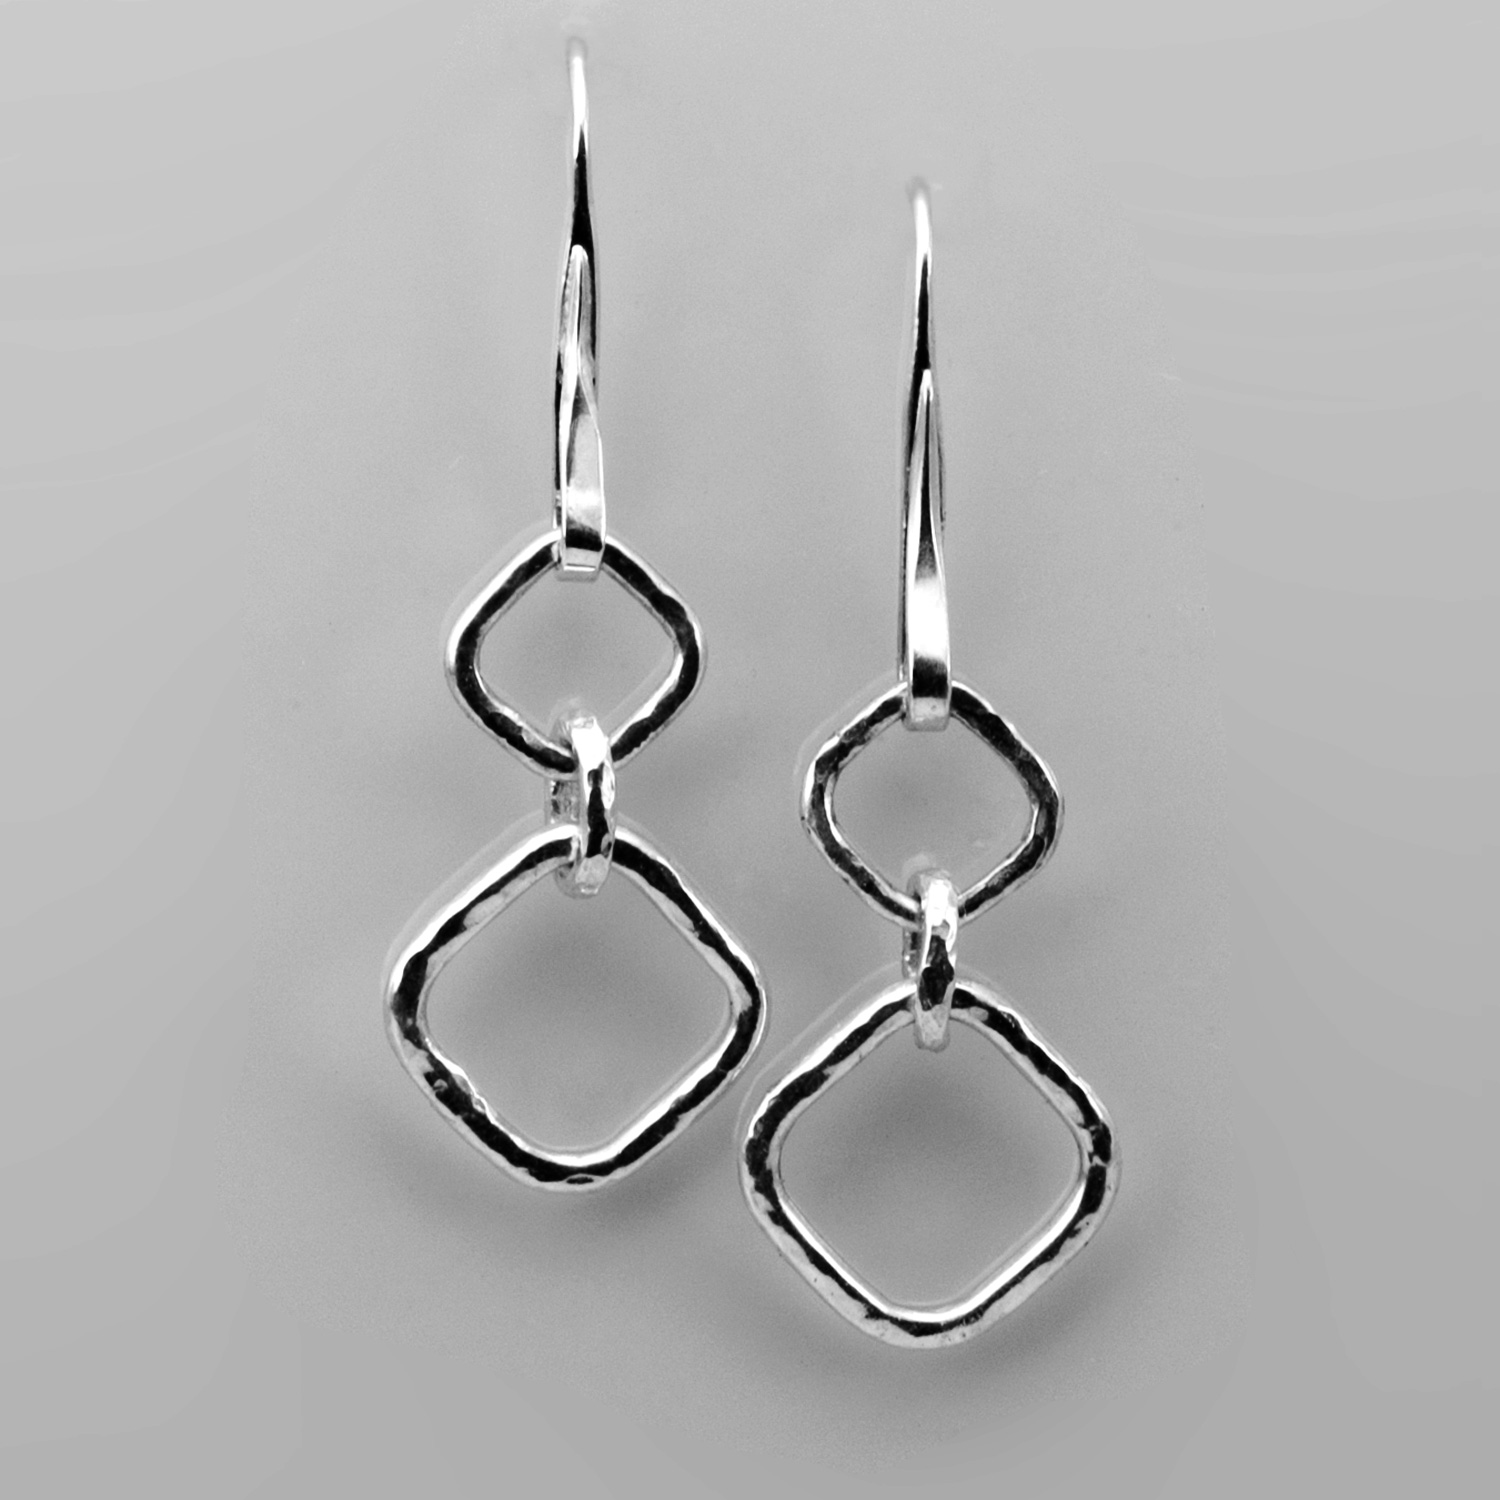 Forged Square Link Earrings - sterling silver by Tamberlaine